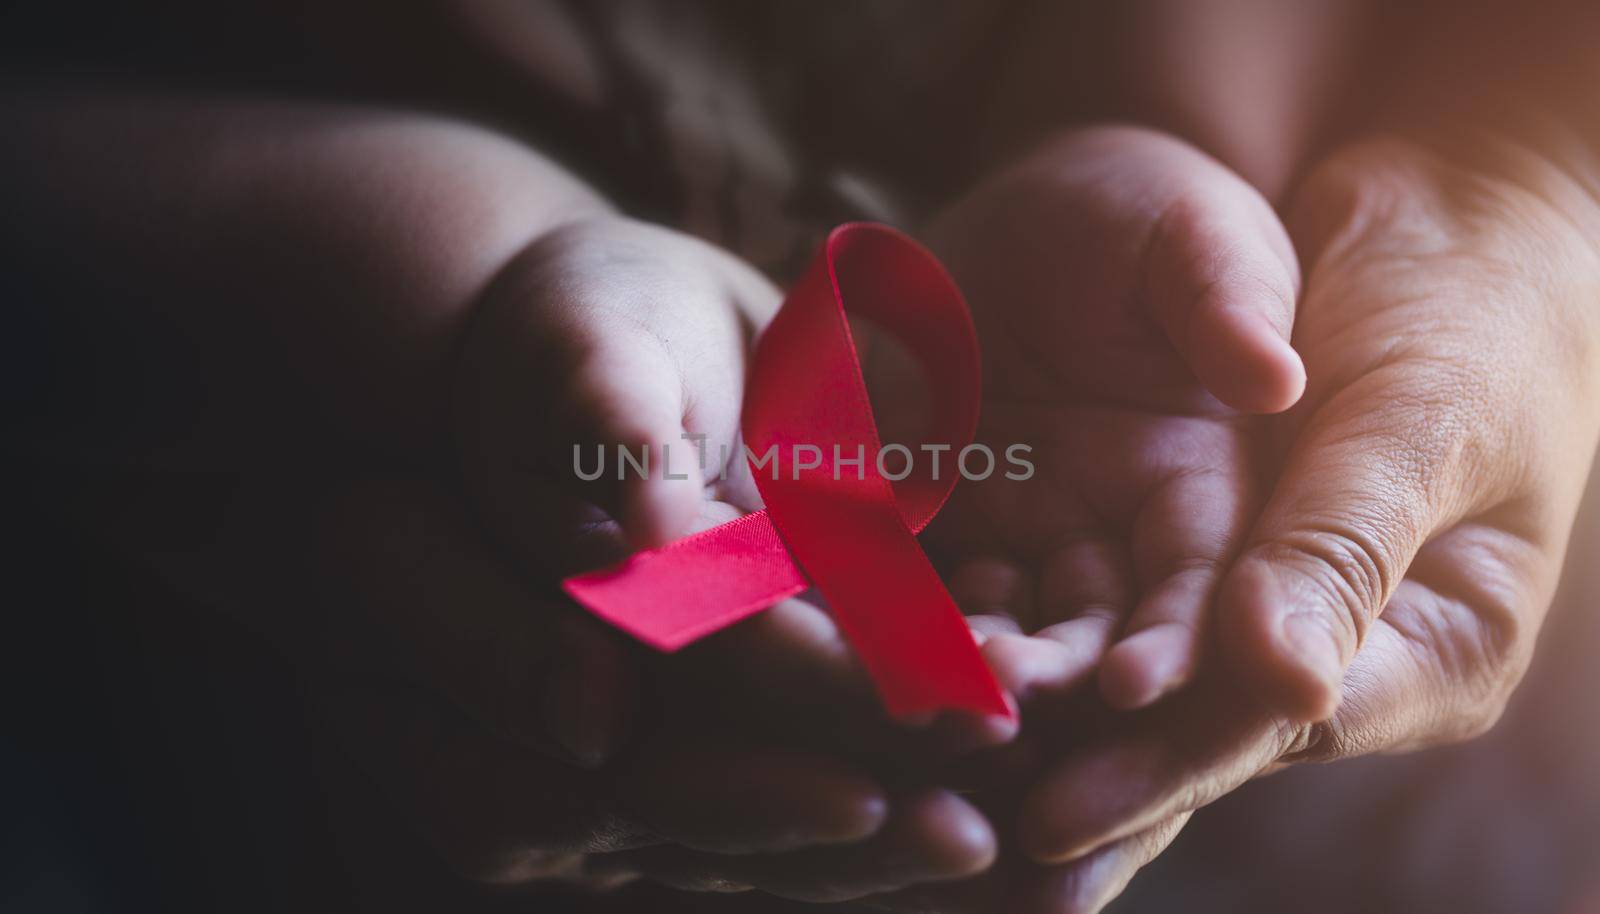 World AIDS day by Wasant